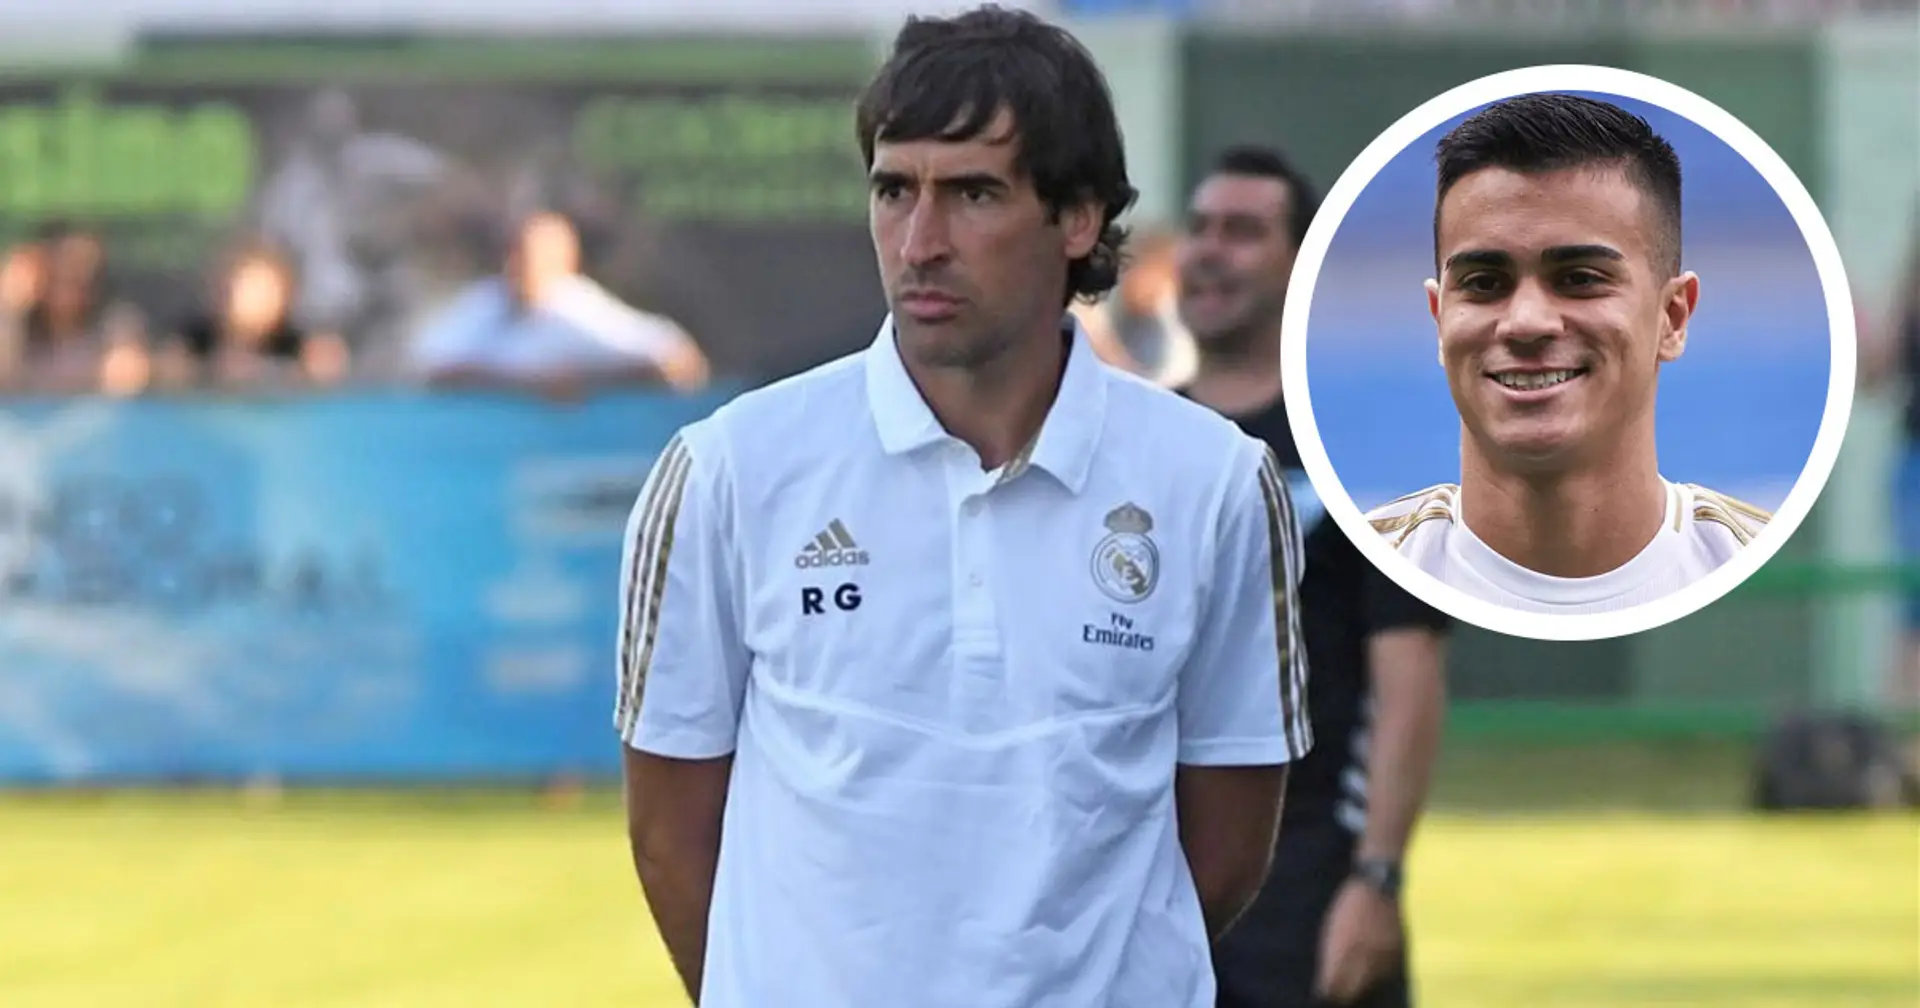 'Great person, great coach': Reinier raves about Castilla manager Raul